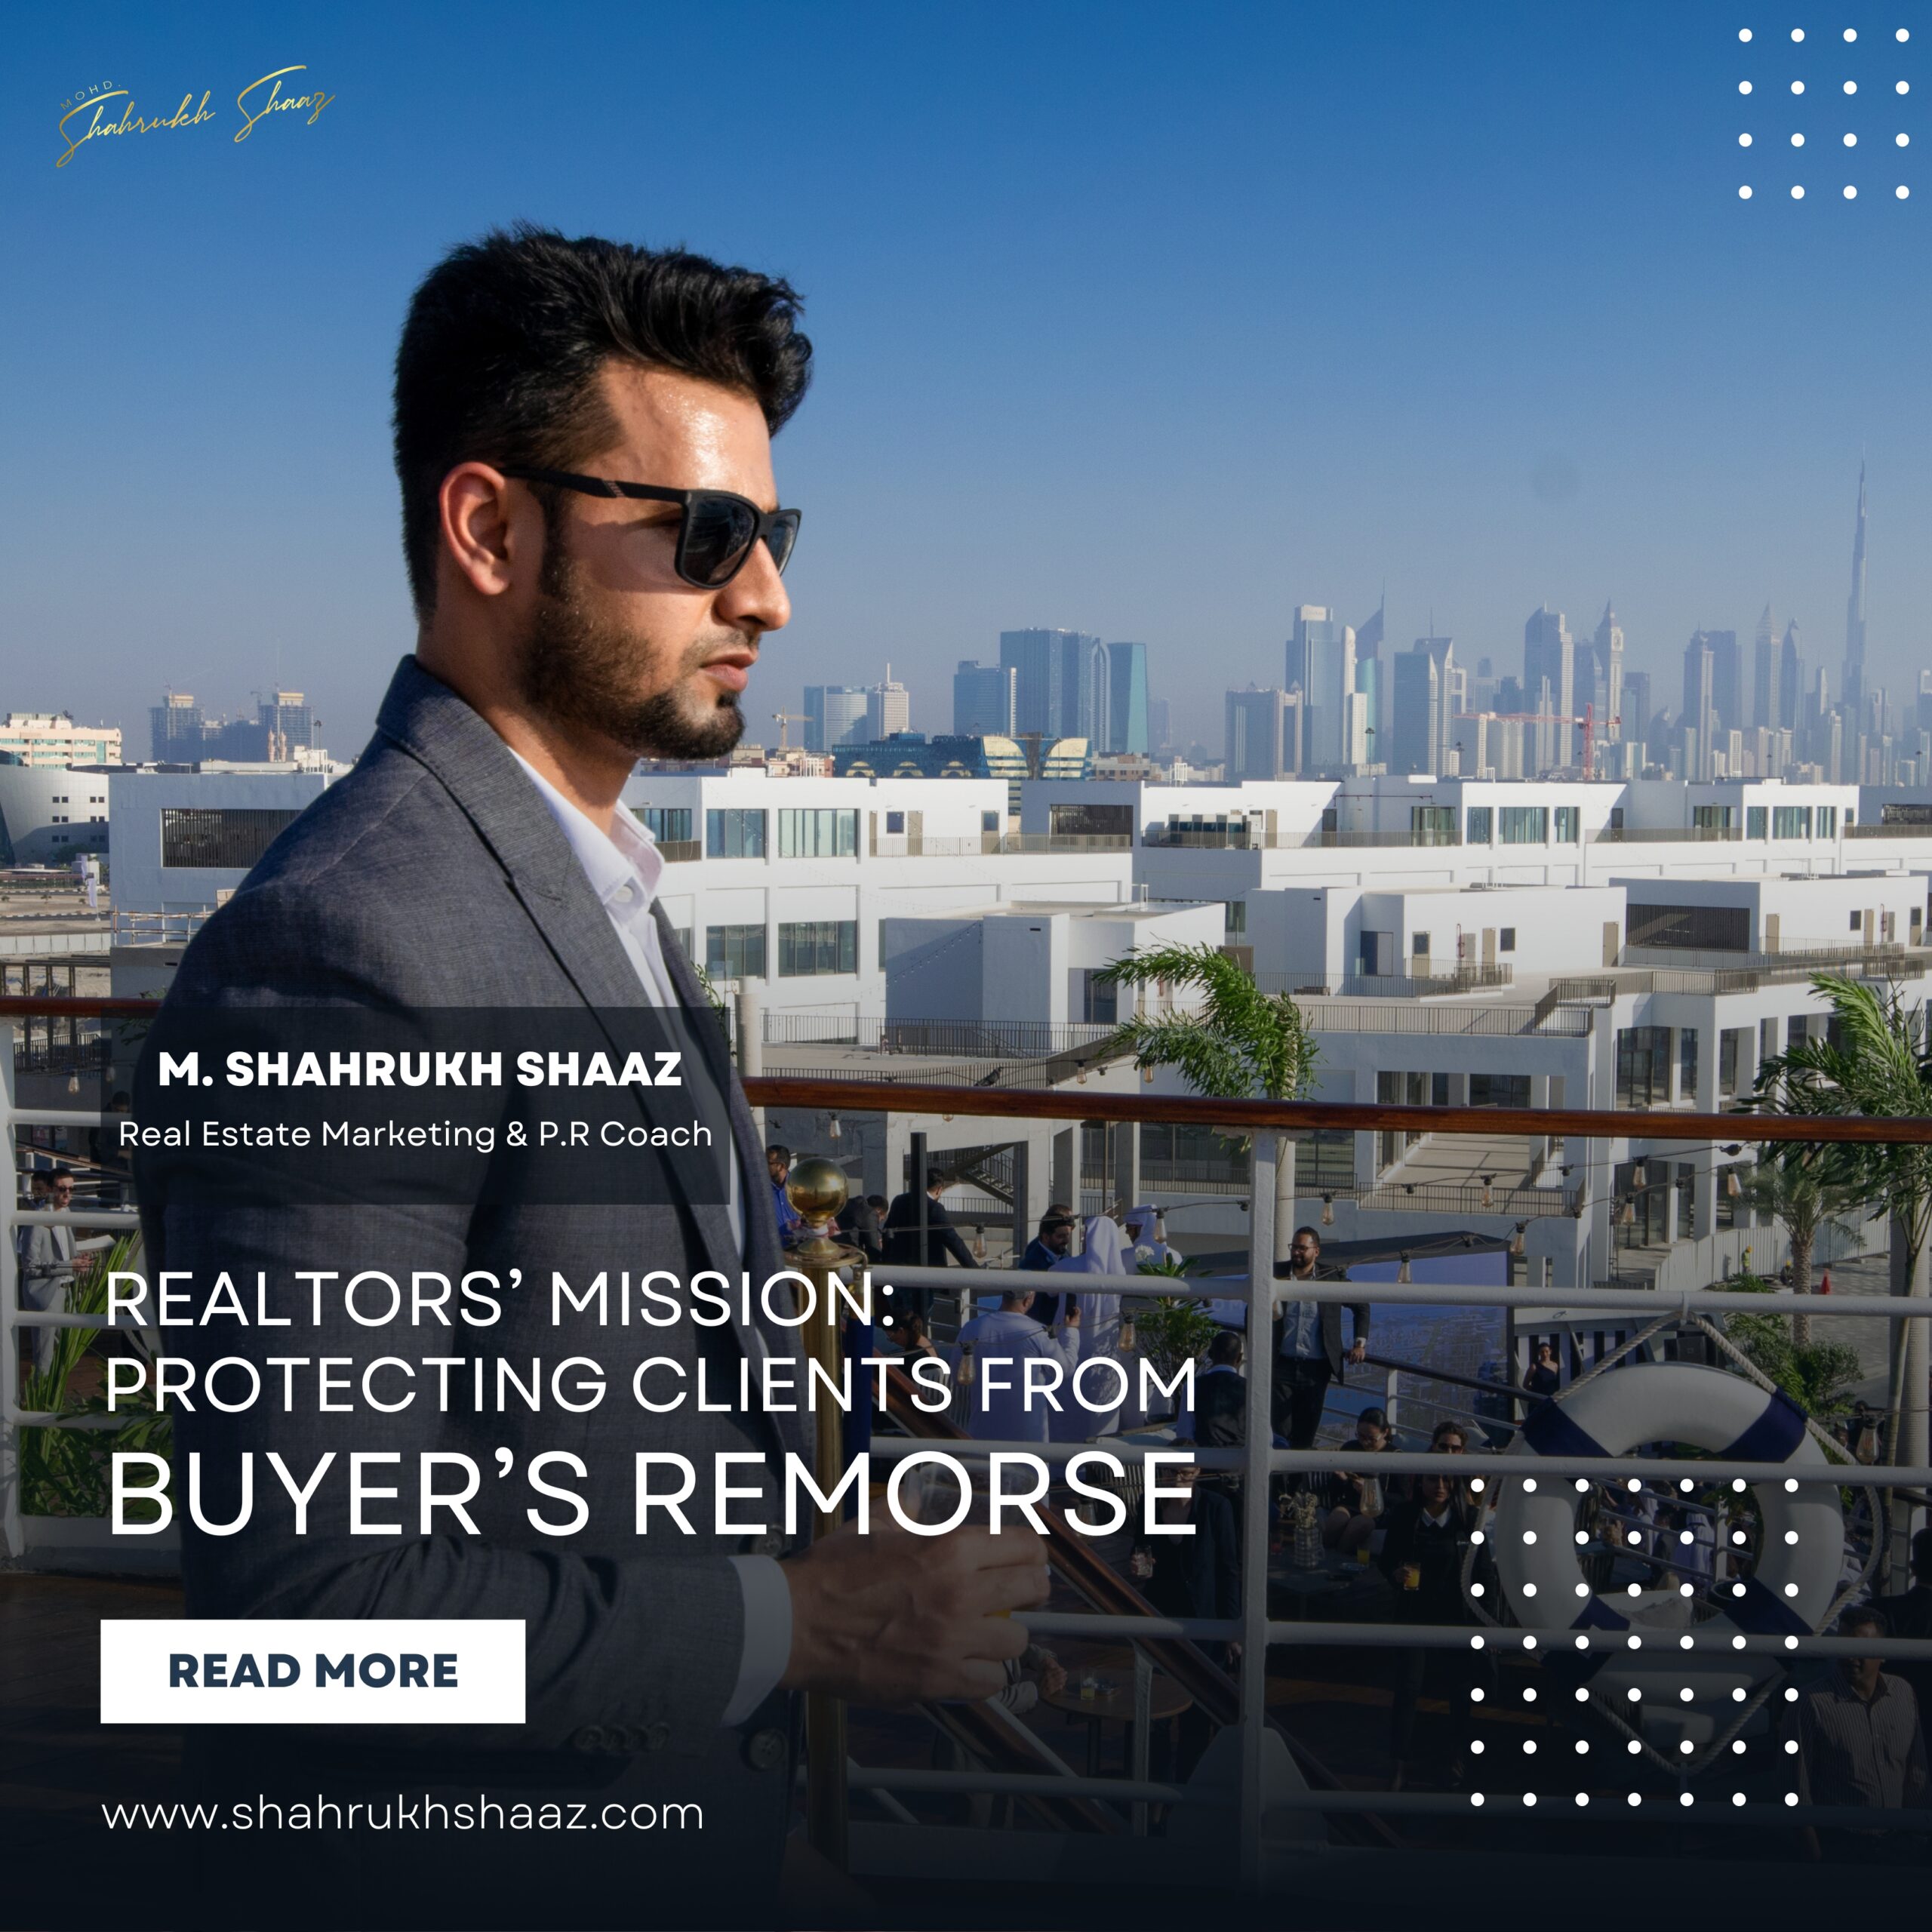 Realtors' mission: Protecting clients from buyer's remorse